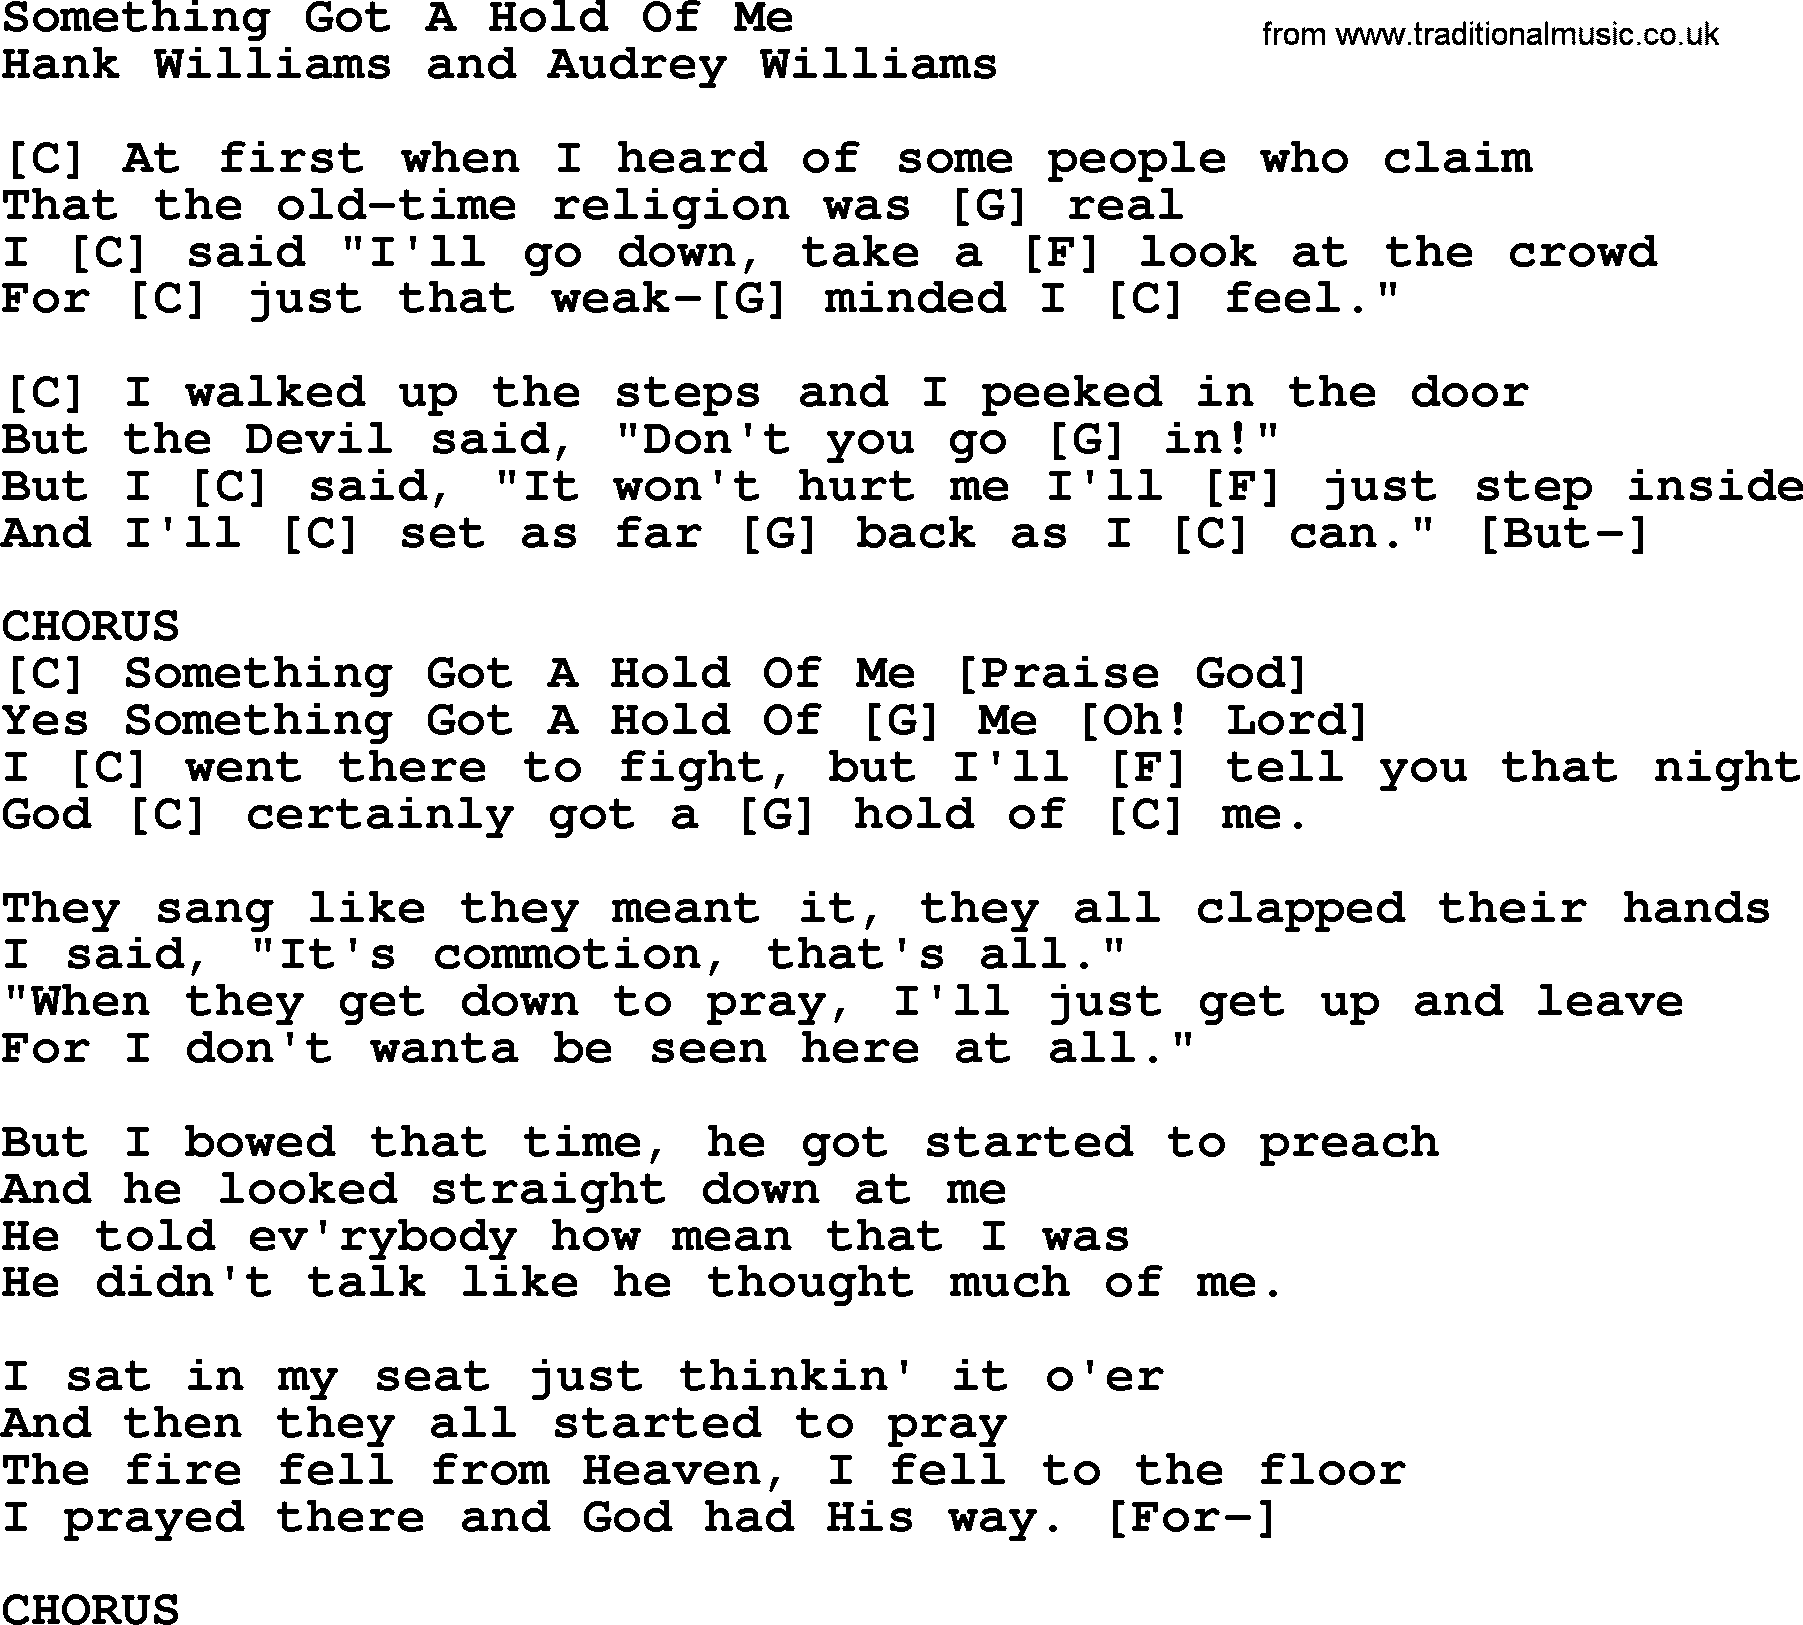 Hank Williams song Something Got A Hold Of Me, lyrics and chords